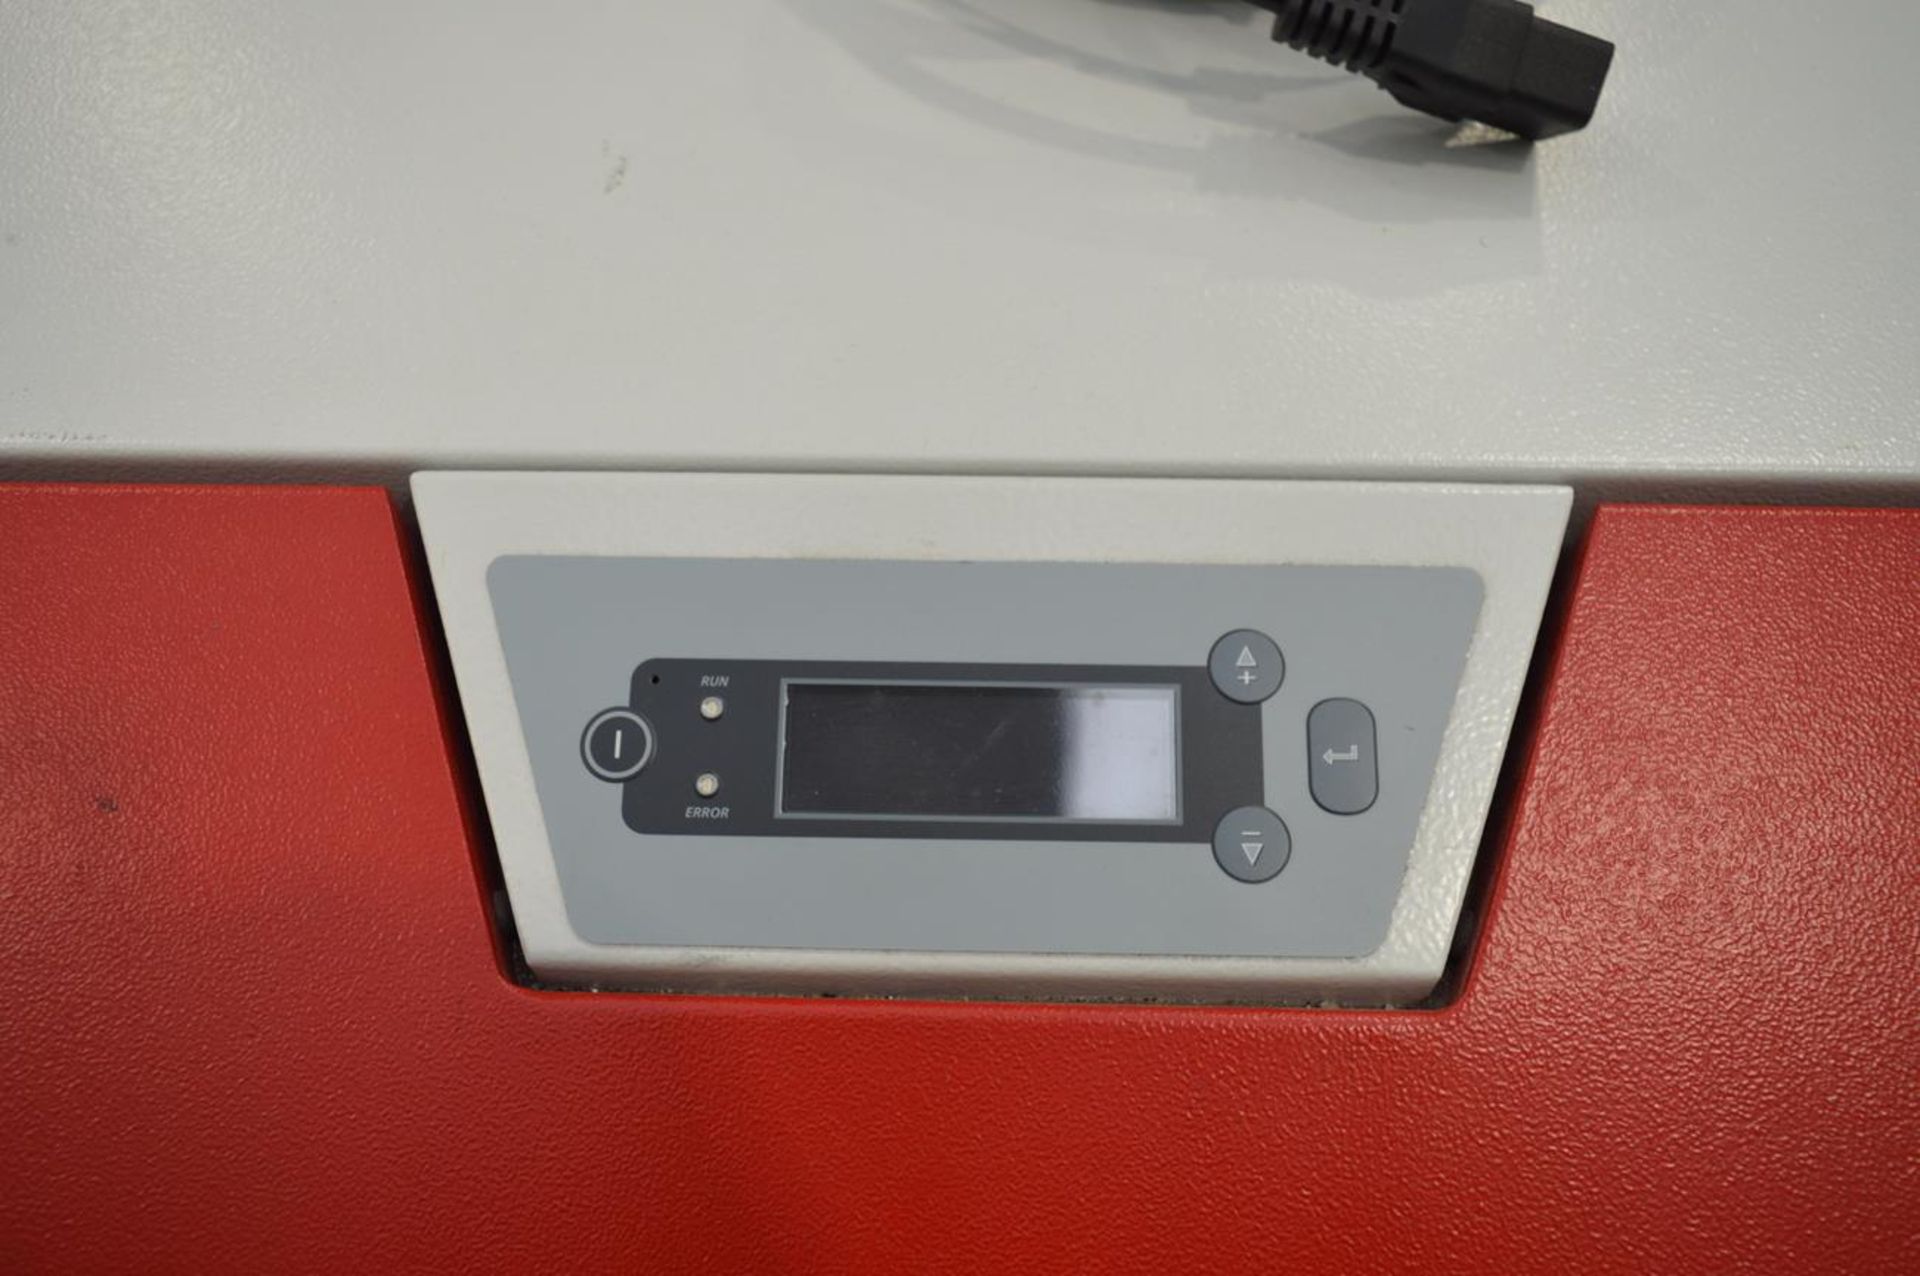 Trotec, Speedy 360 CO2 laser cutter and engraver , Serial No. S36-1408 with controller - Bild 7 aus 9